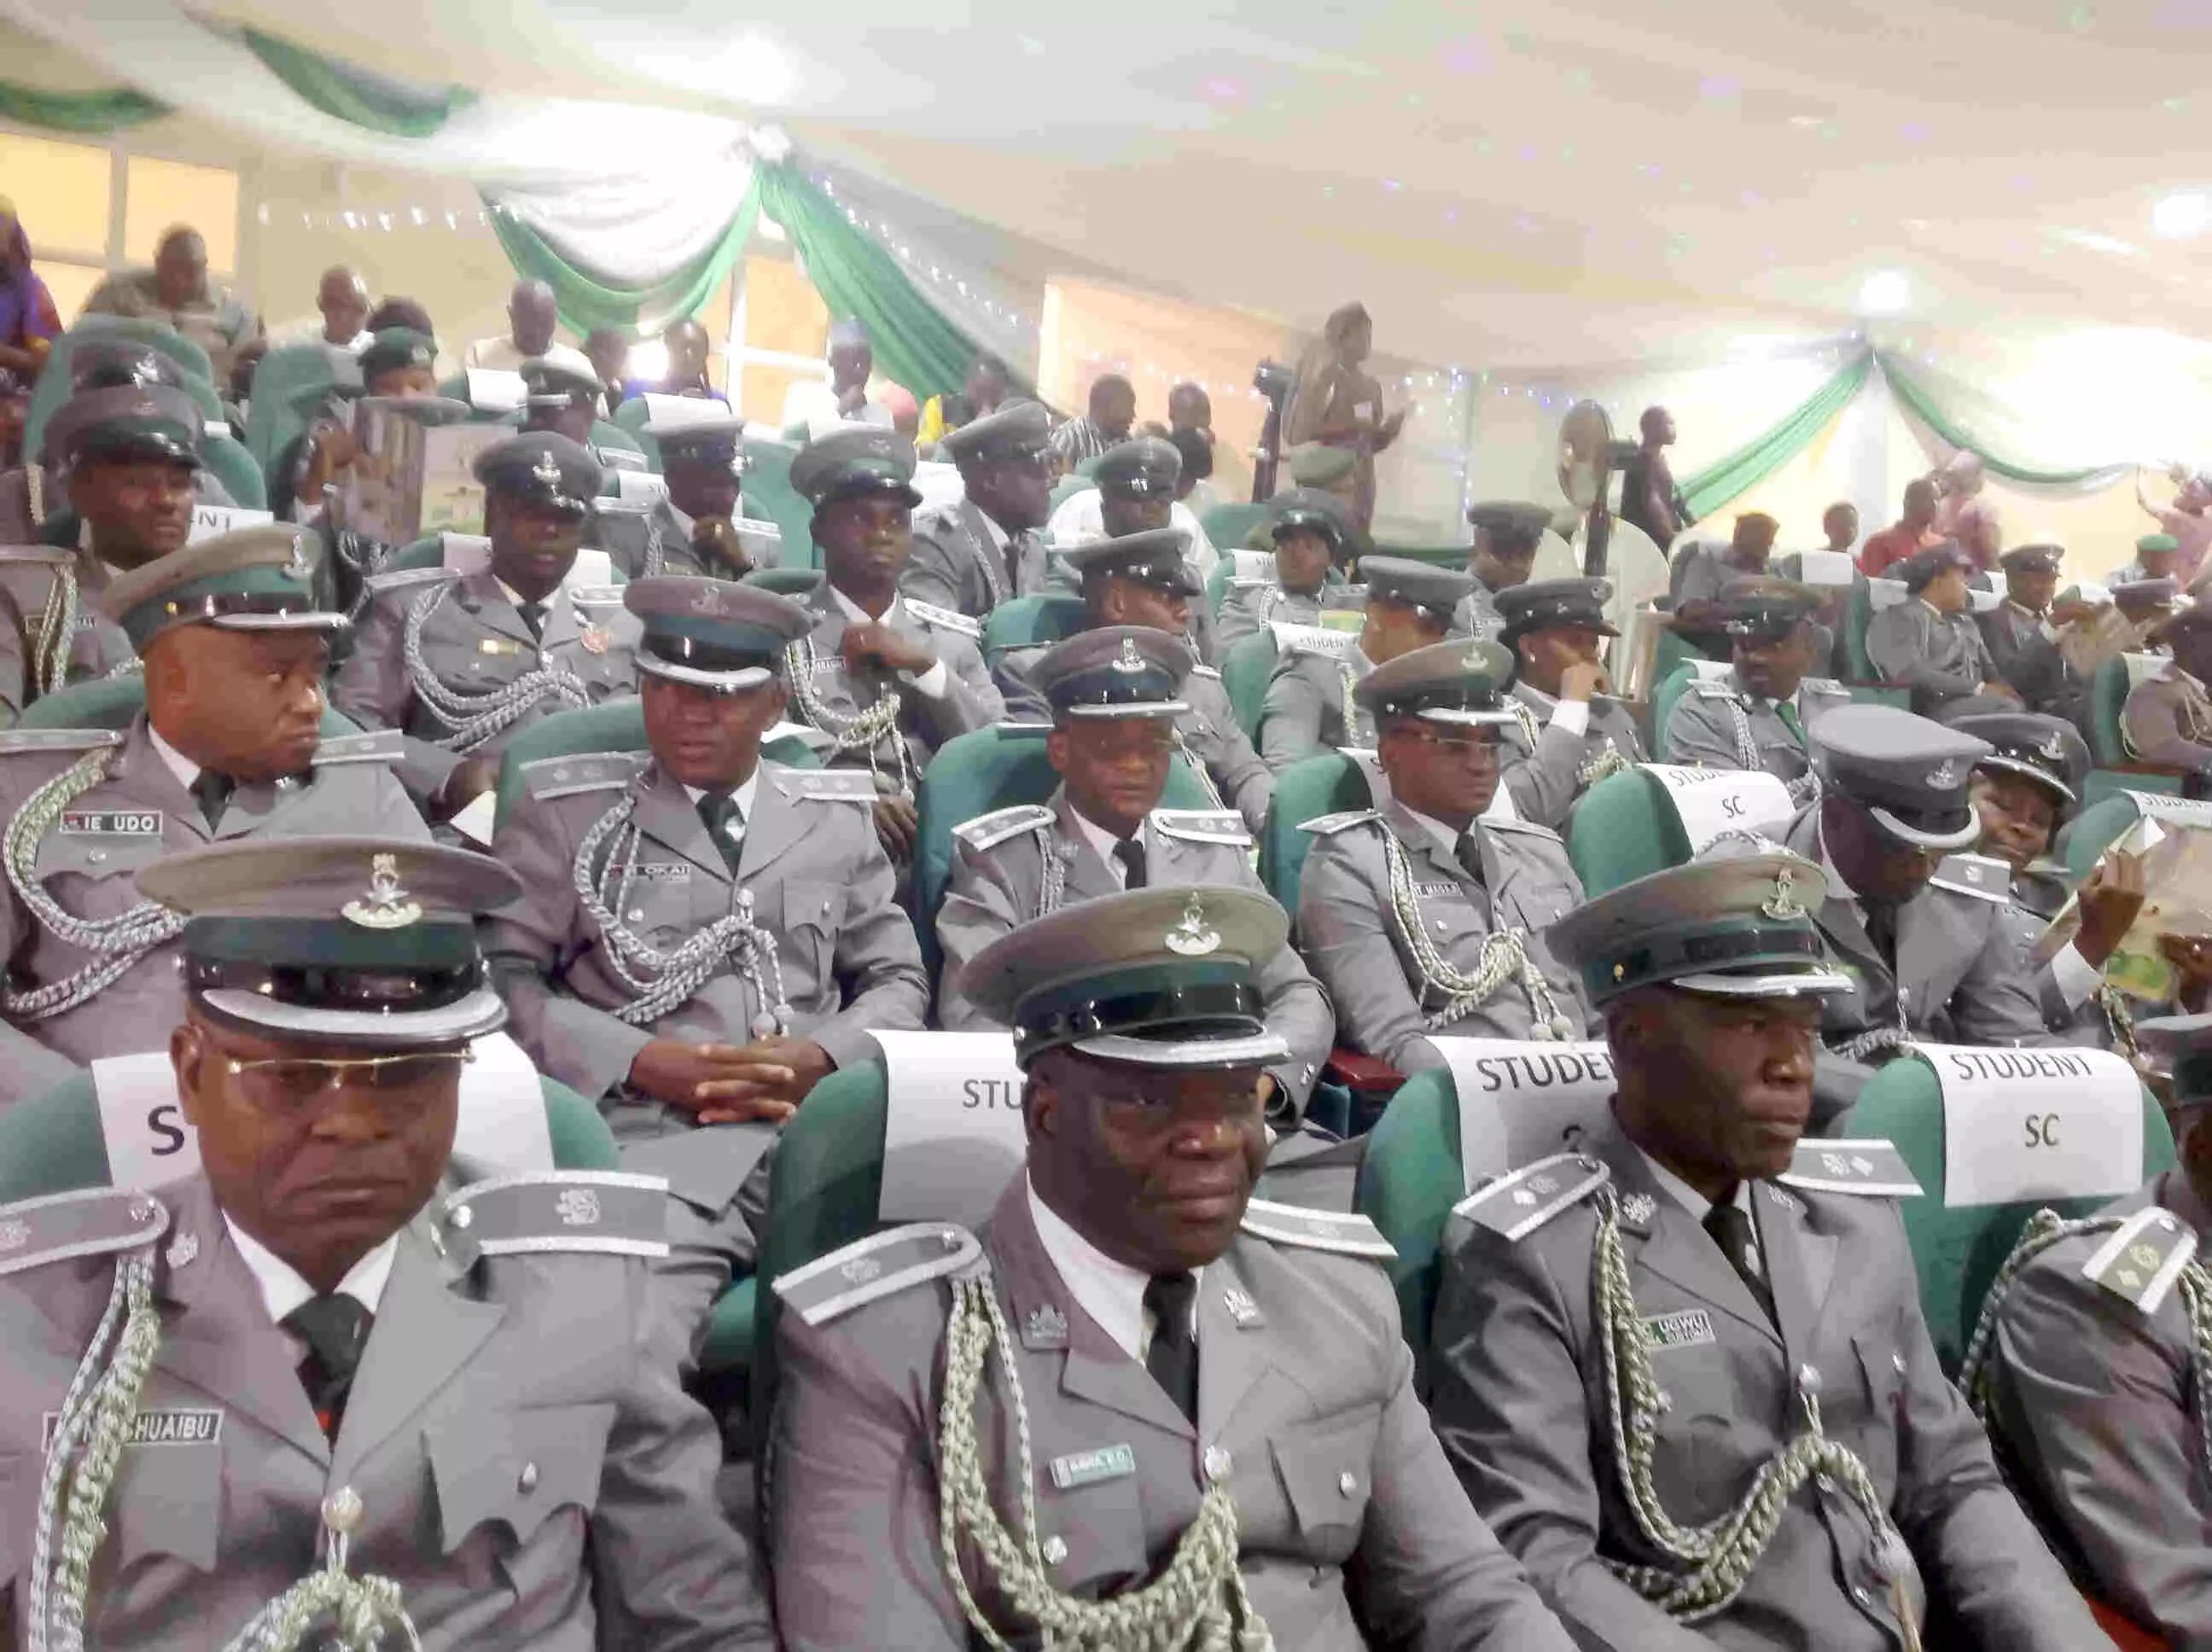 `You fail staff college courses thrice, you end your career’ – C-G Customs